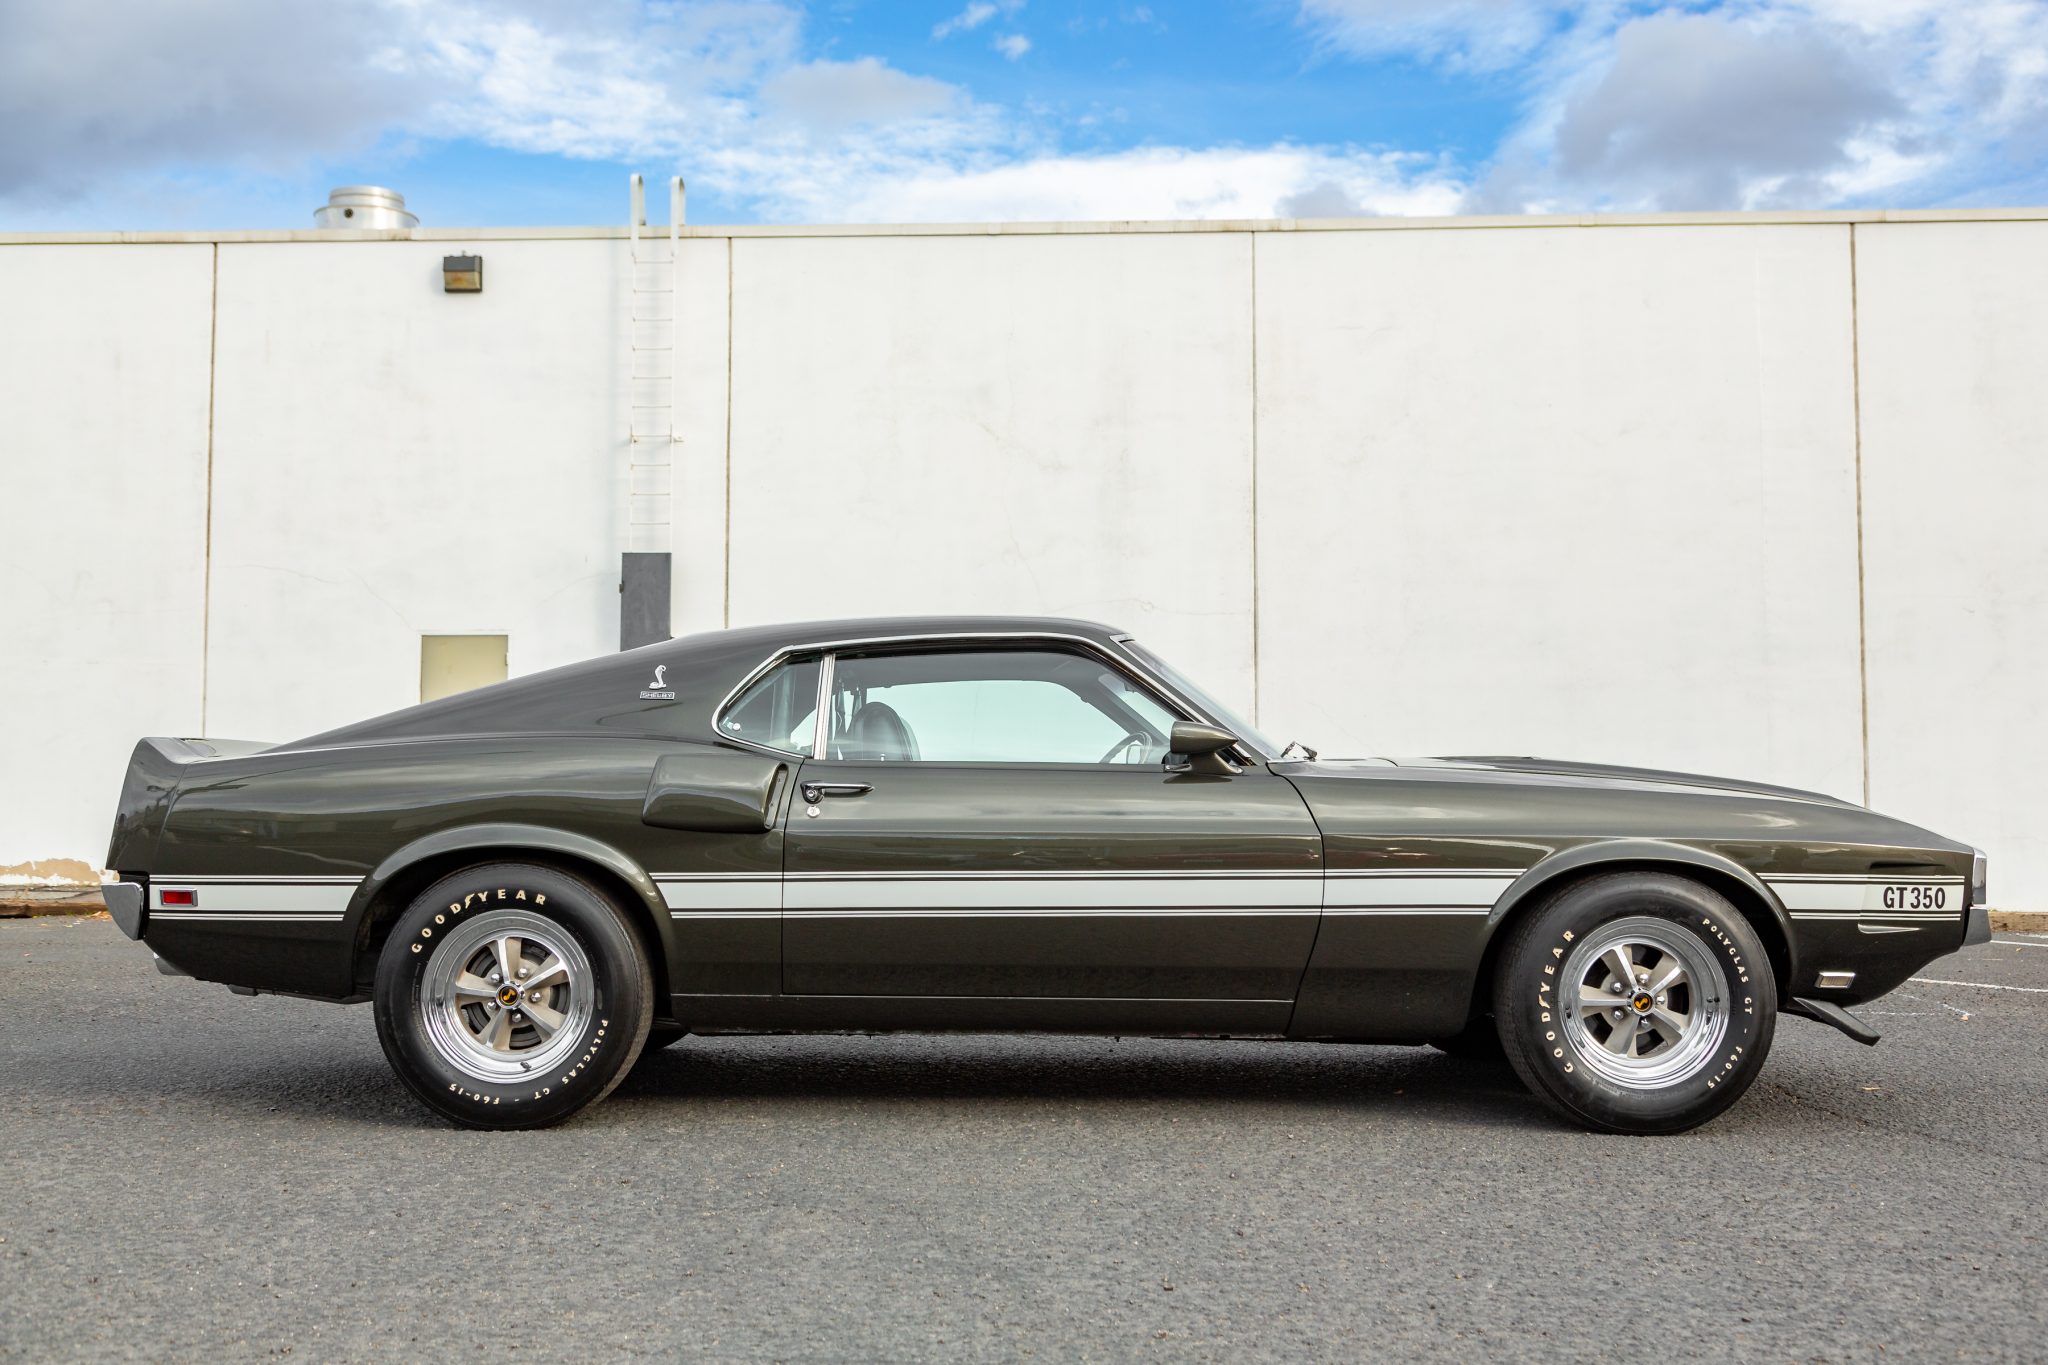 You Might Not Want To Buy a Former Rental Car, Unless It's a Shelby ...